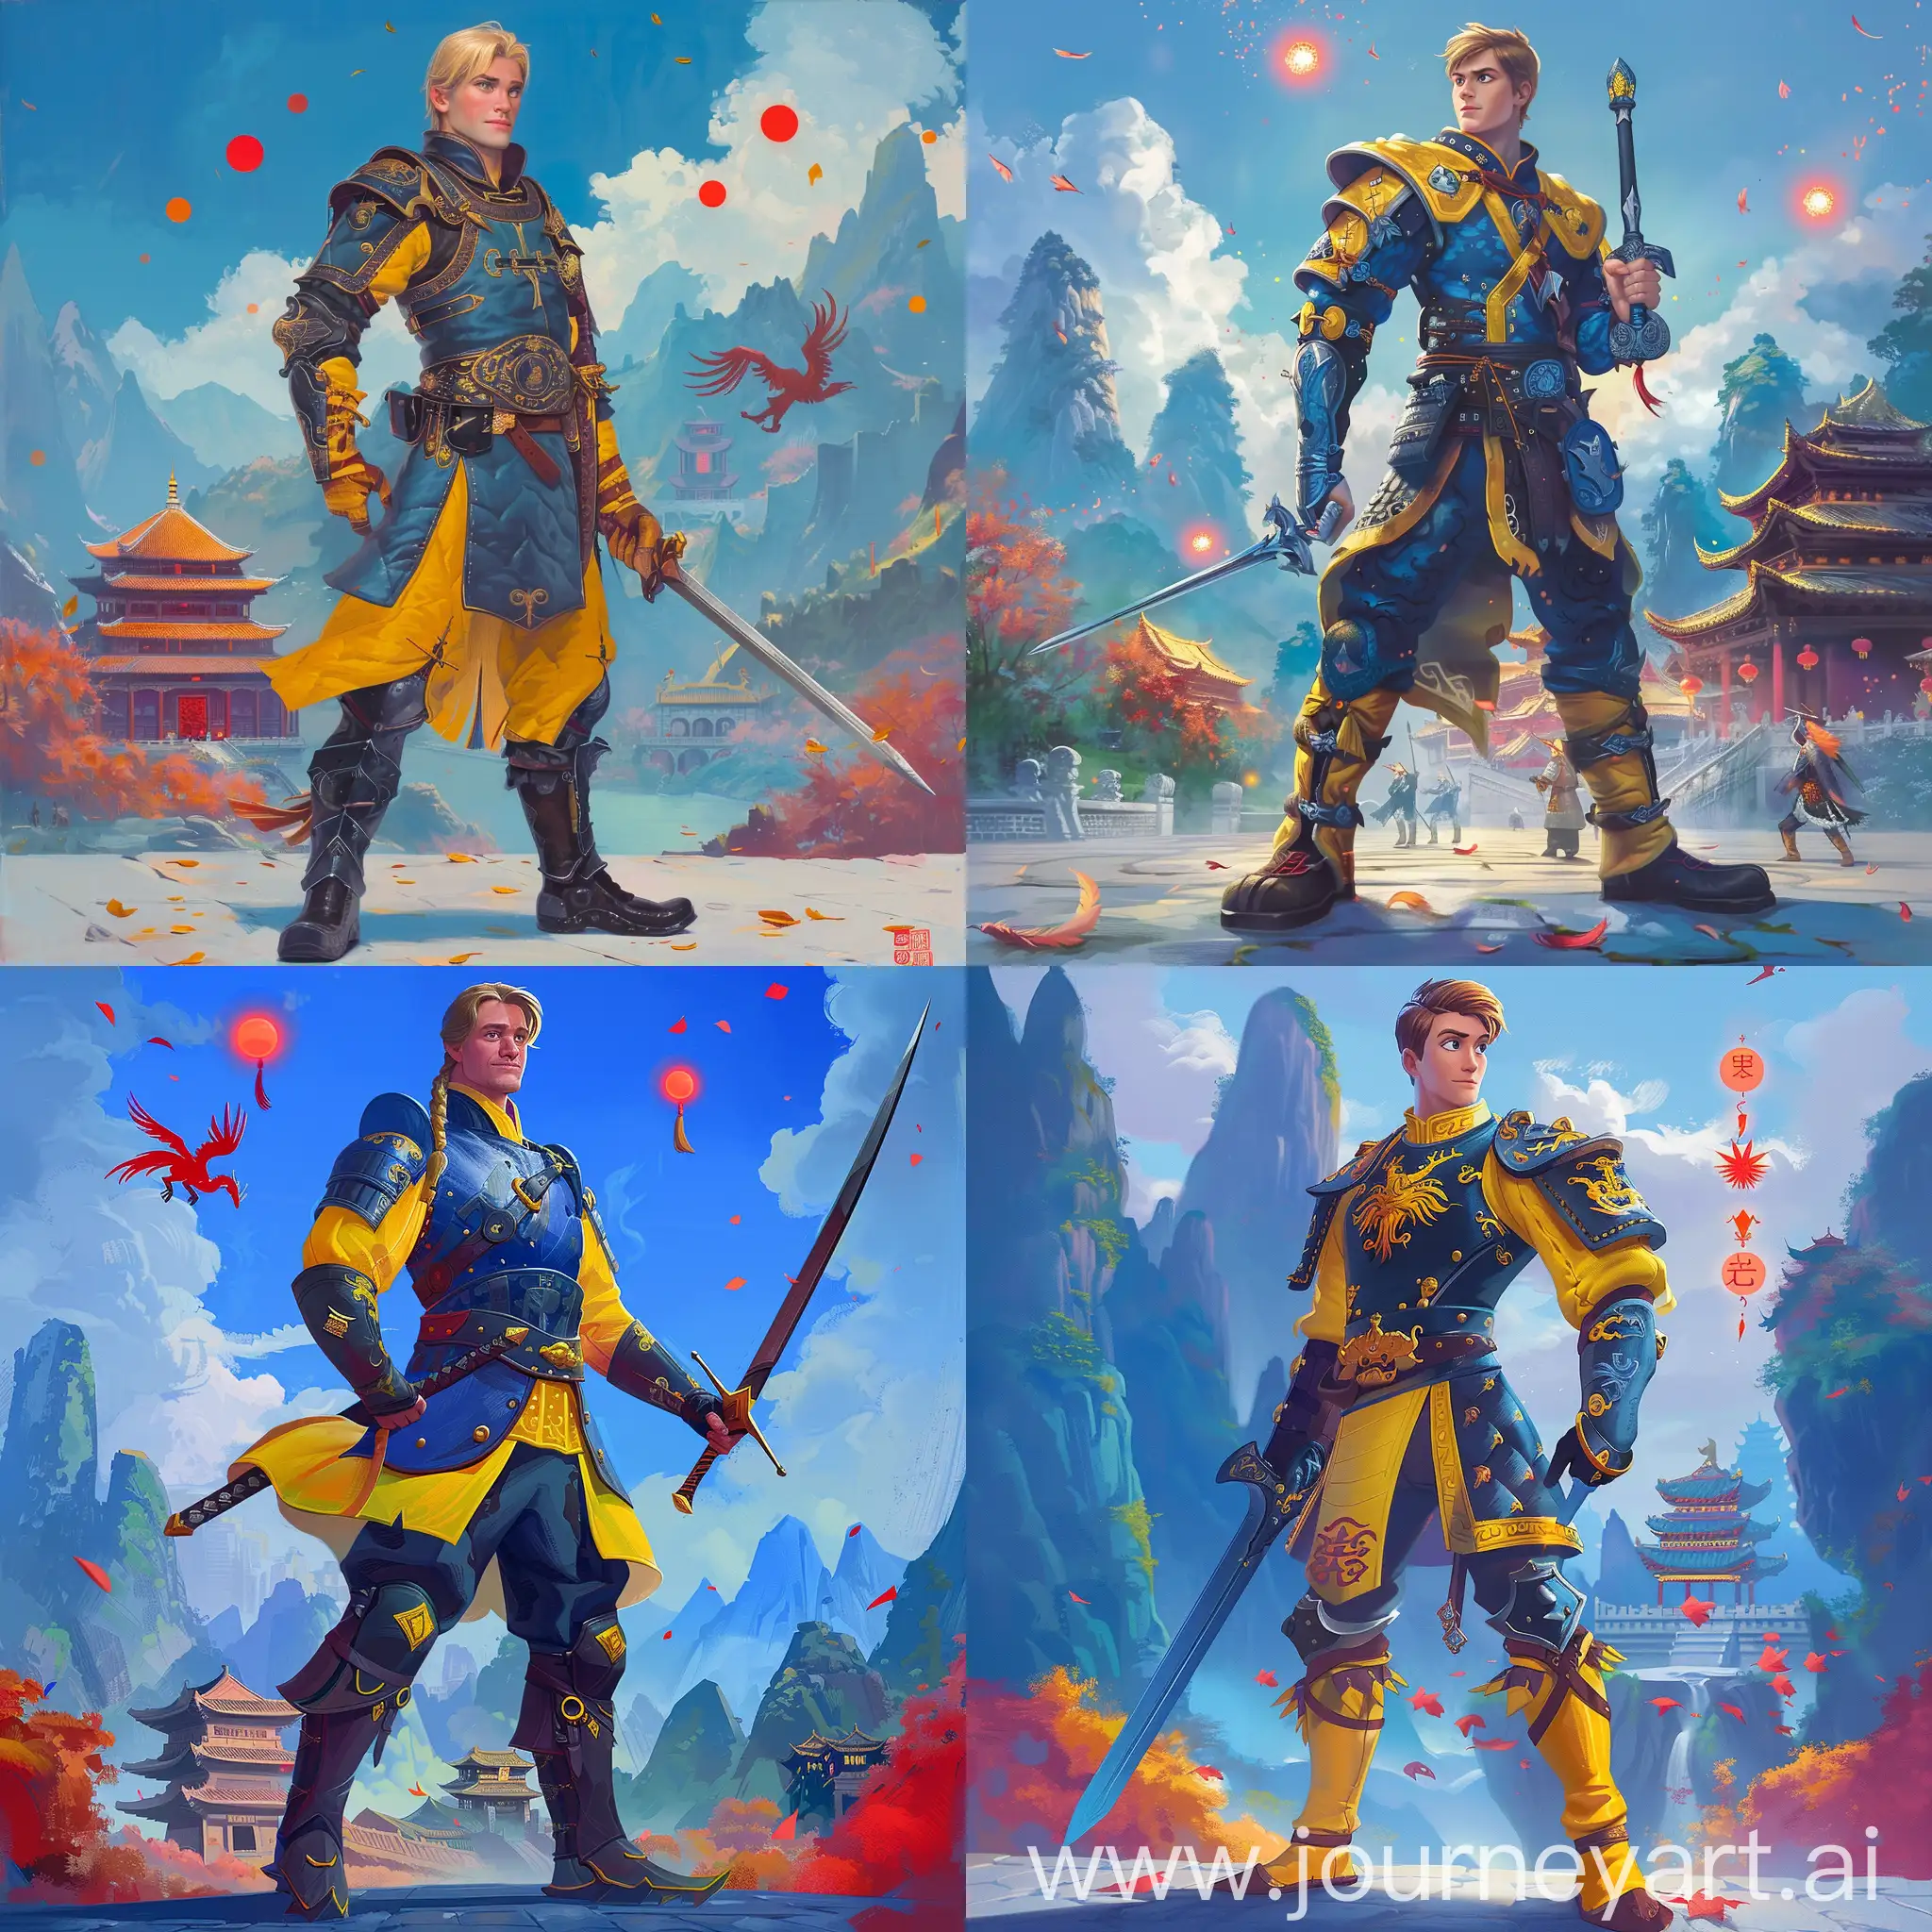 Historic painting style:

a Disney Norwegian Prince Kristoff Bjorgman, he wears dark azure and yellow color Chinese style medieval armor and boots, he holds a Chinese sword in right hand, 

Chinese Guilin mountains and temple as background, small phoenix and three small red suns in blue sky.